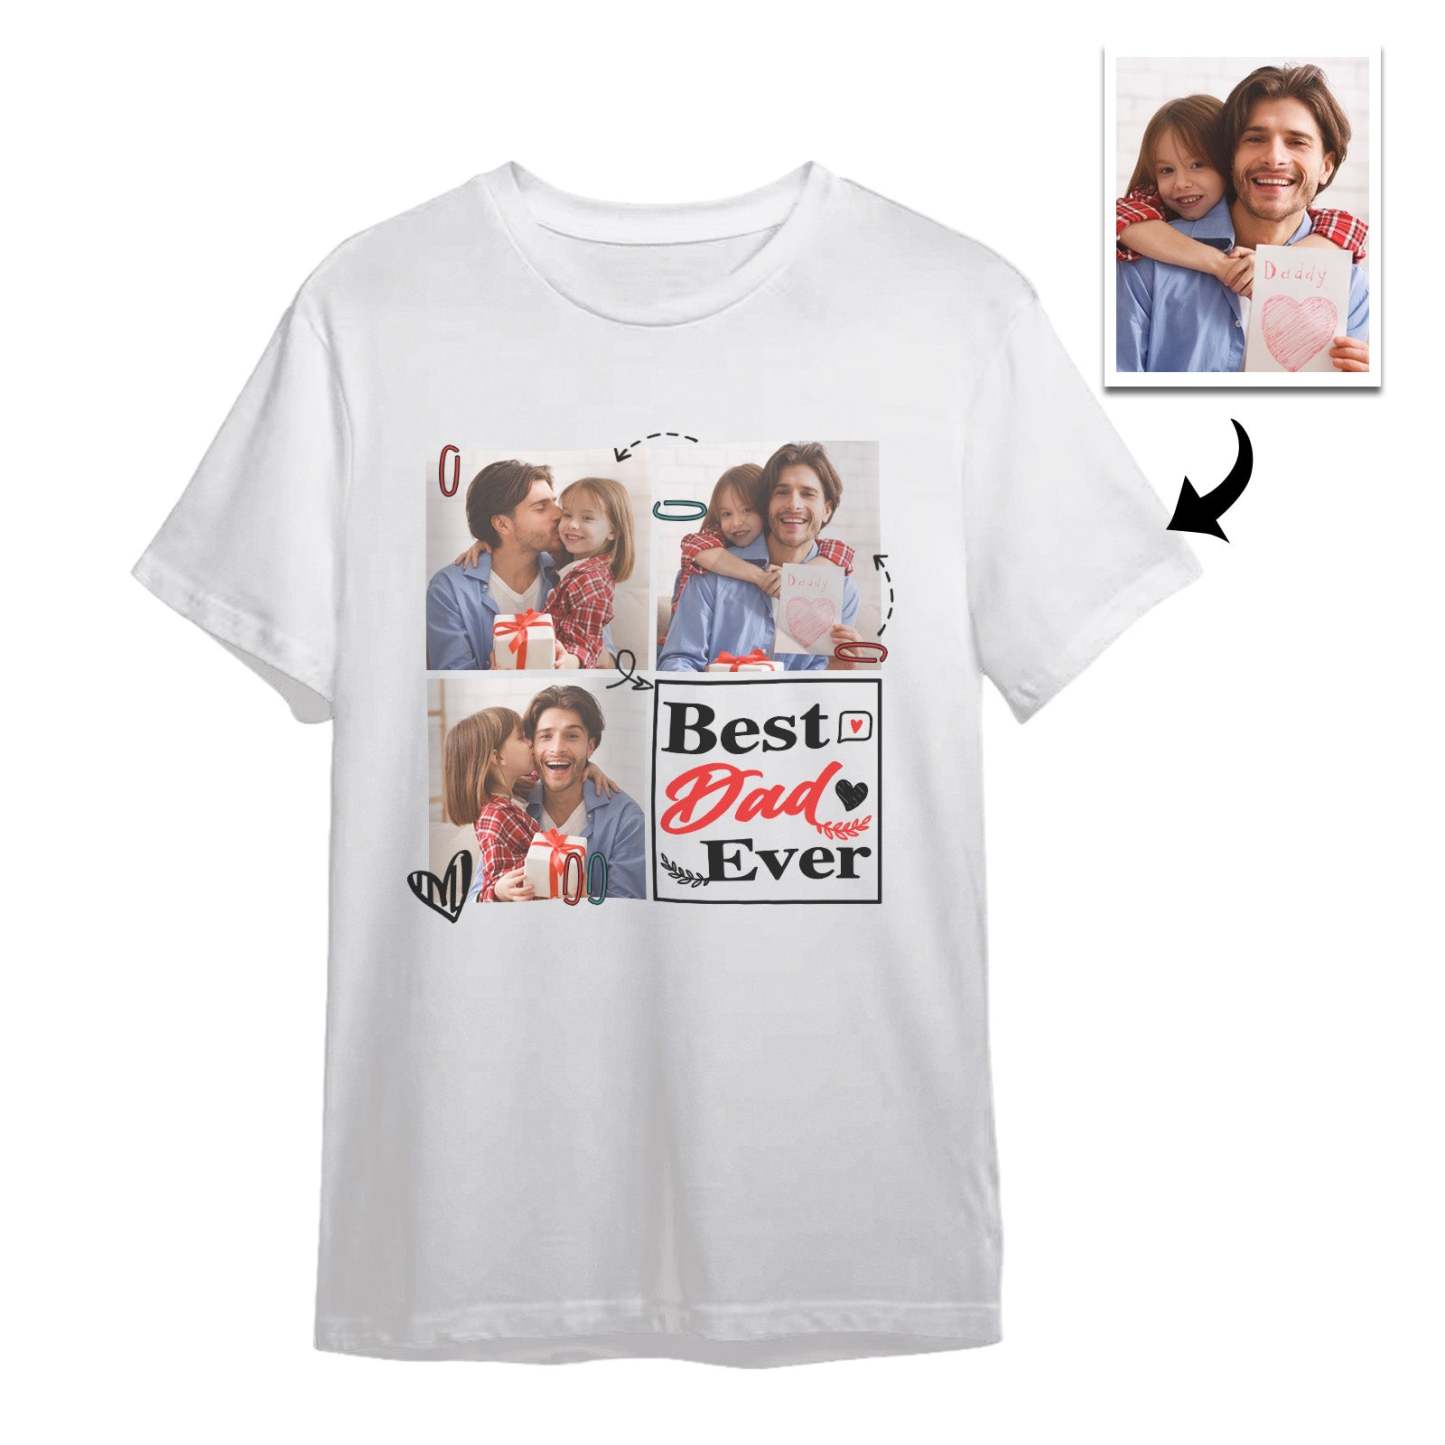 Custom 3 Photos T-Shirt Personalized Photo Men's T-Shirt Best Dad Ever Father's Day Gift Family T-Shirt - GetPhotoSocksUk